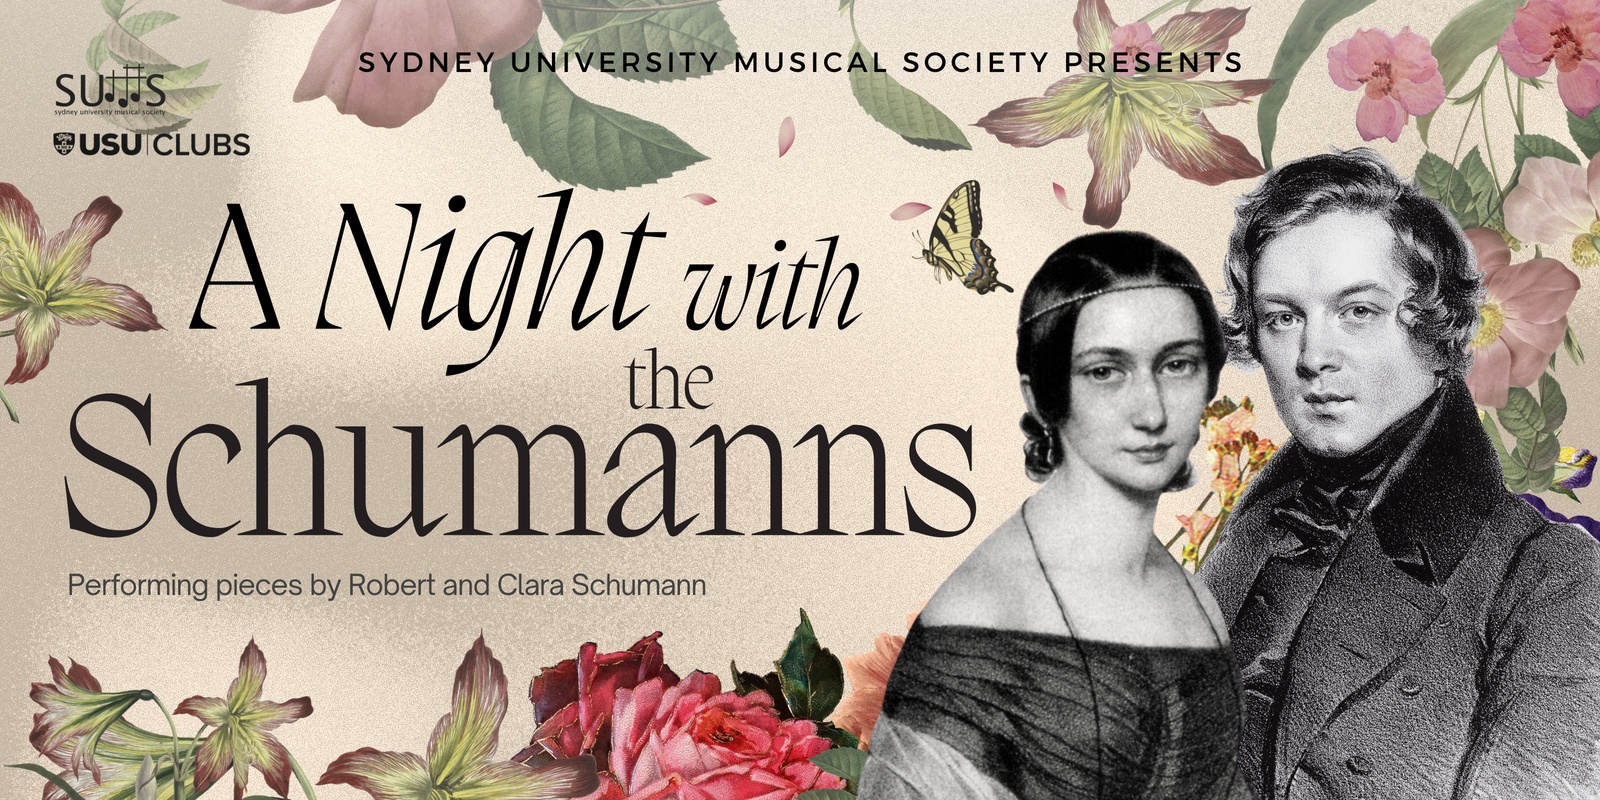 Banner image for Sydney University Musical Society Presents: A Night with the Schumanns